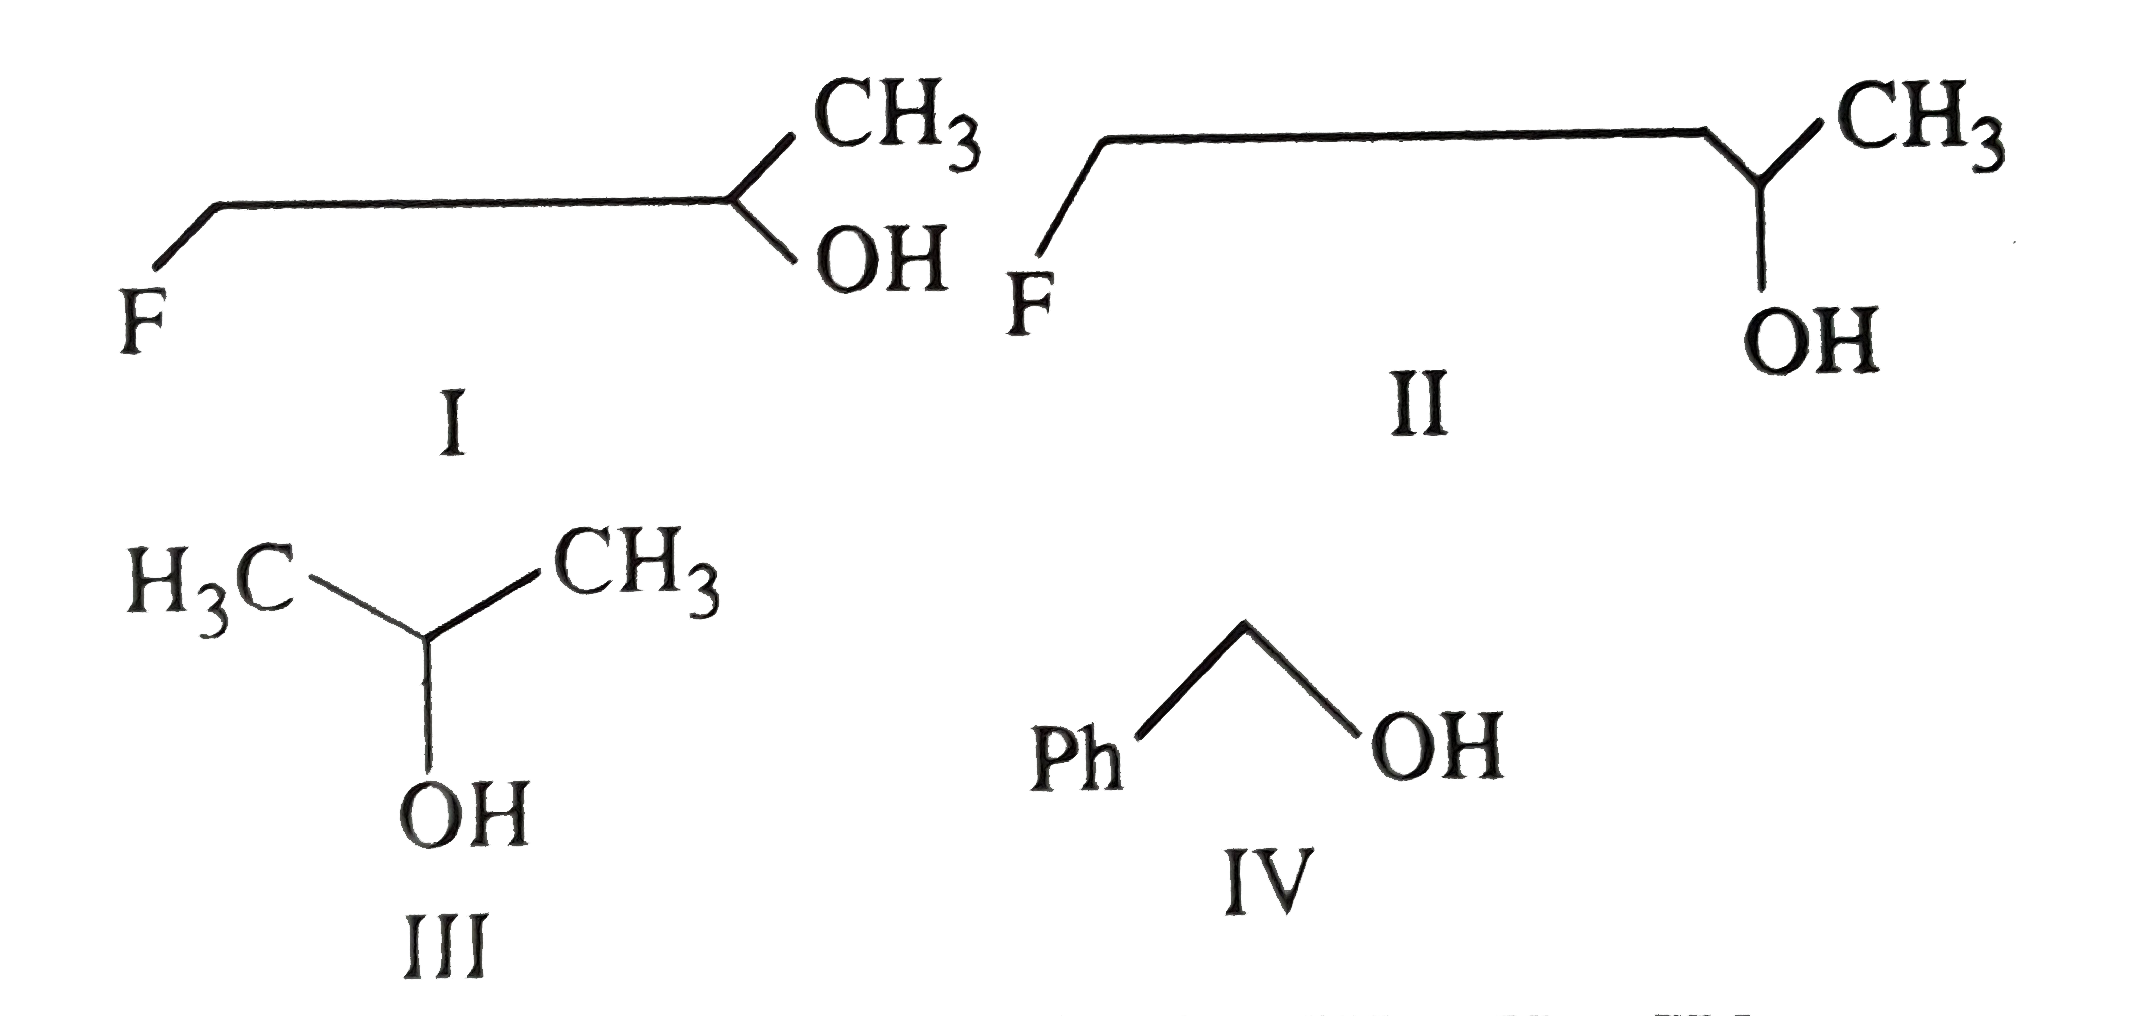 The order of reactivity of tghe following alcohols towards HCI is